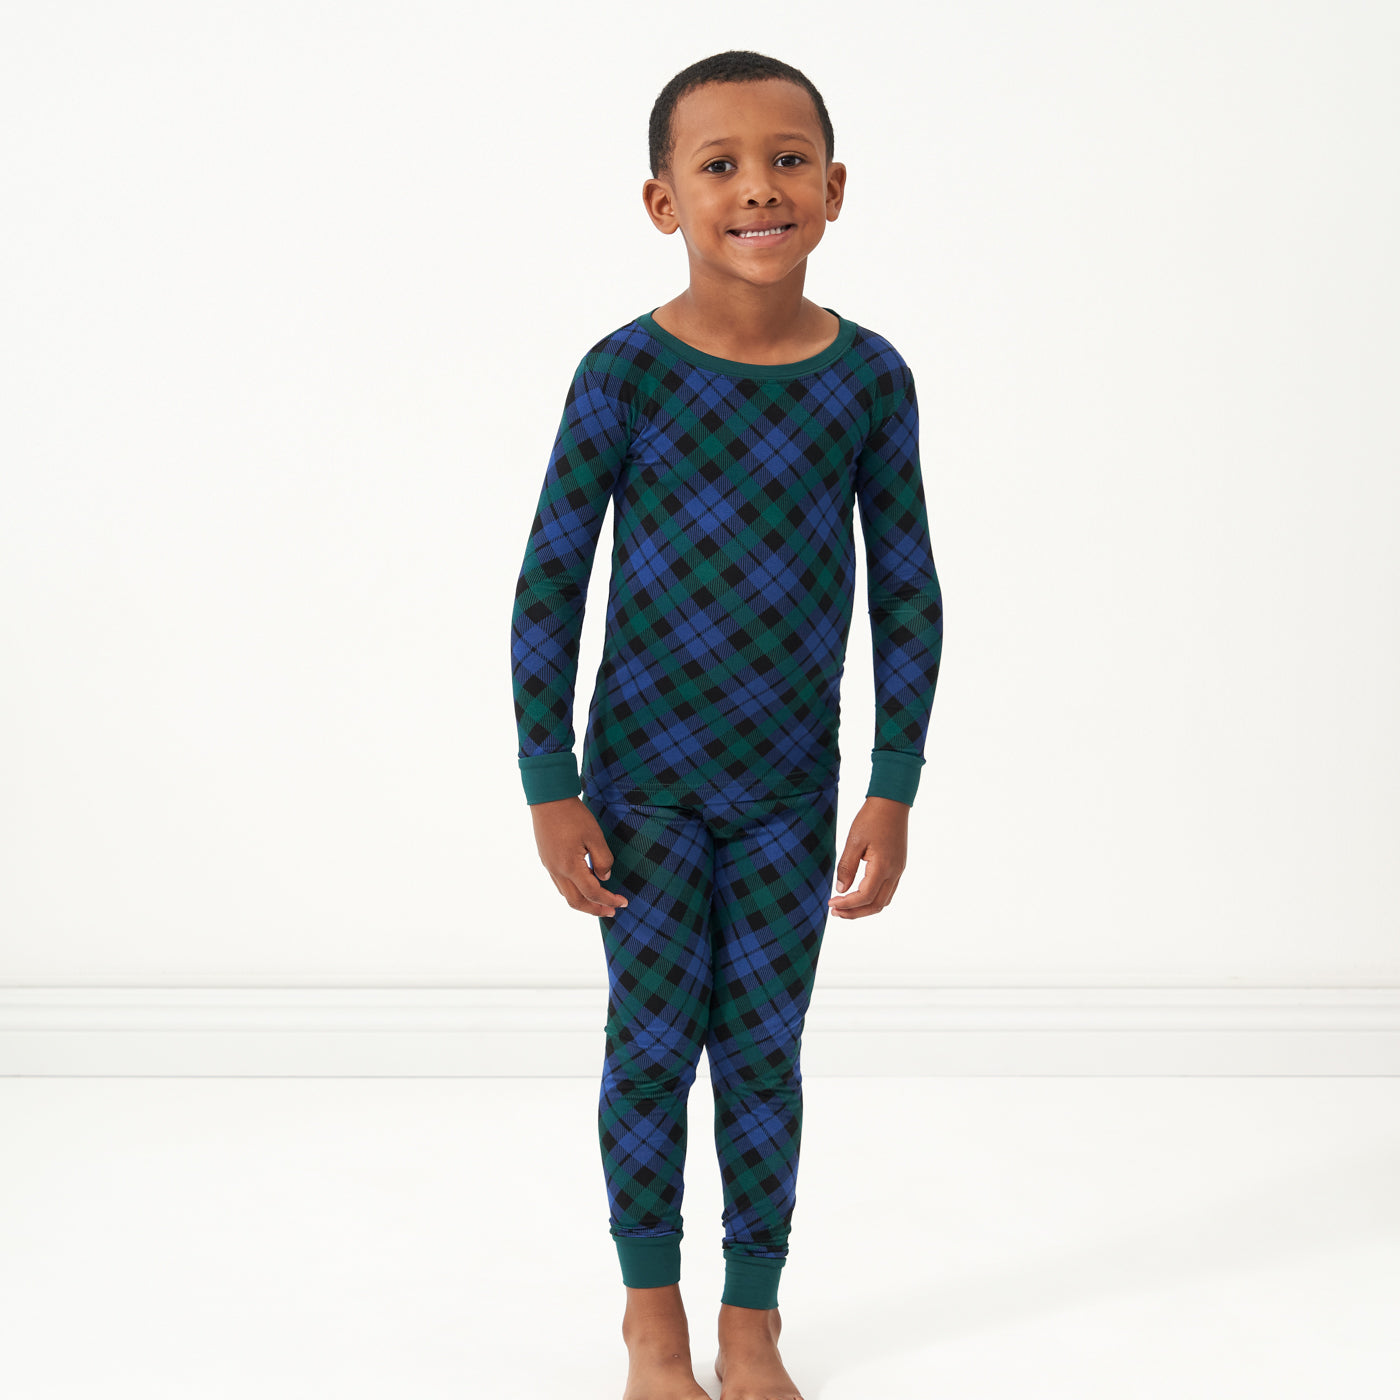 Alternate image of a child wearing an Emerald Plaid two-piece pajama set